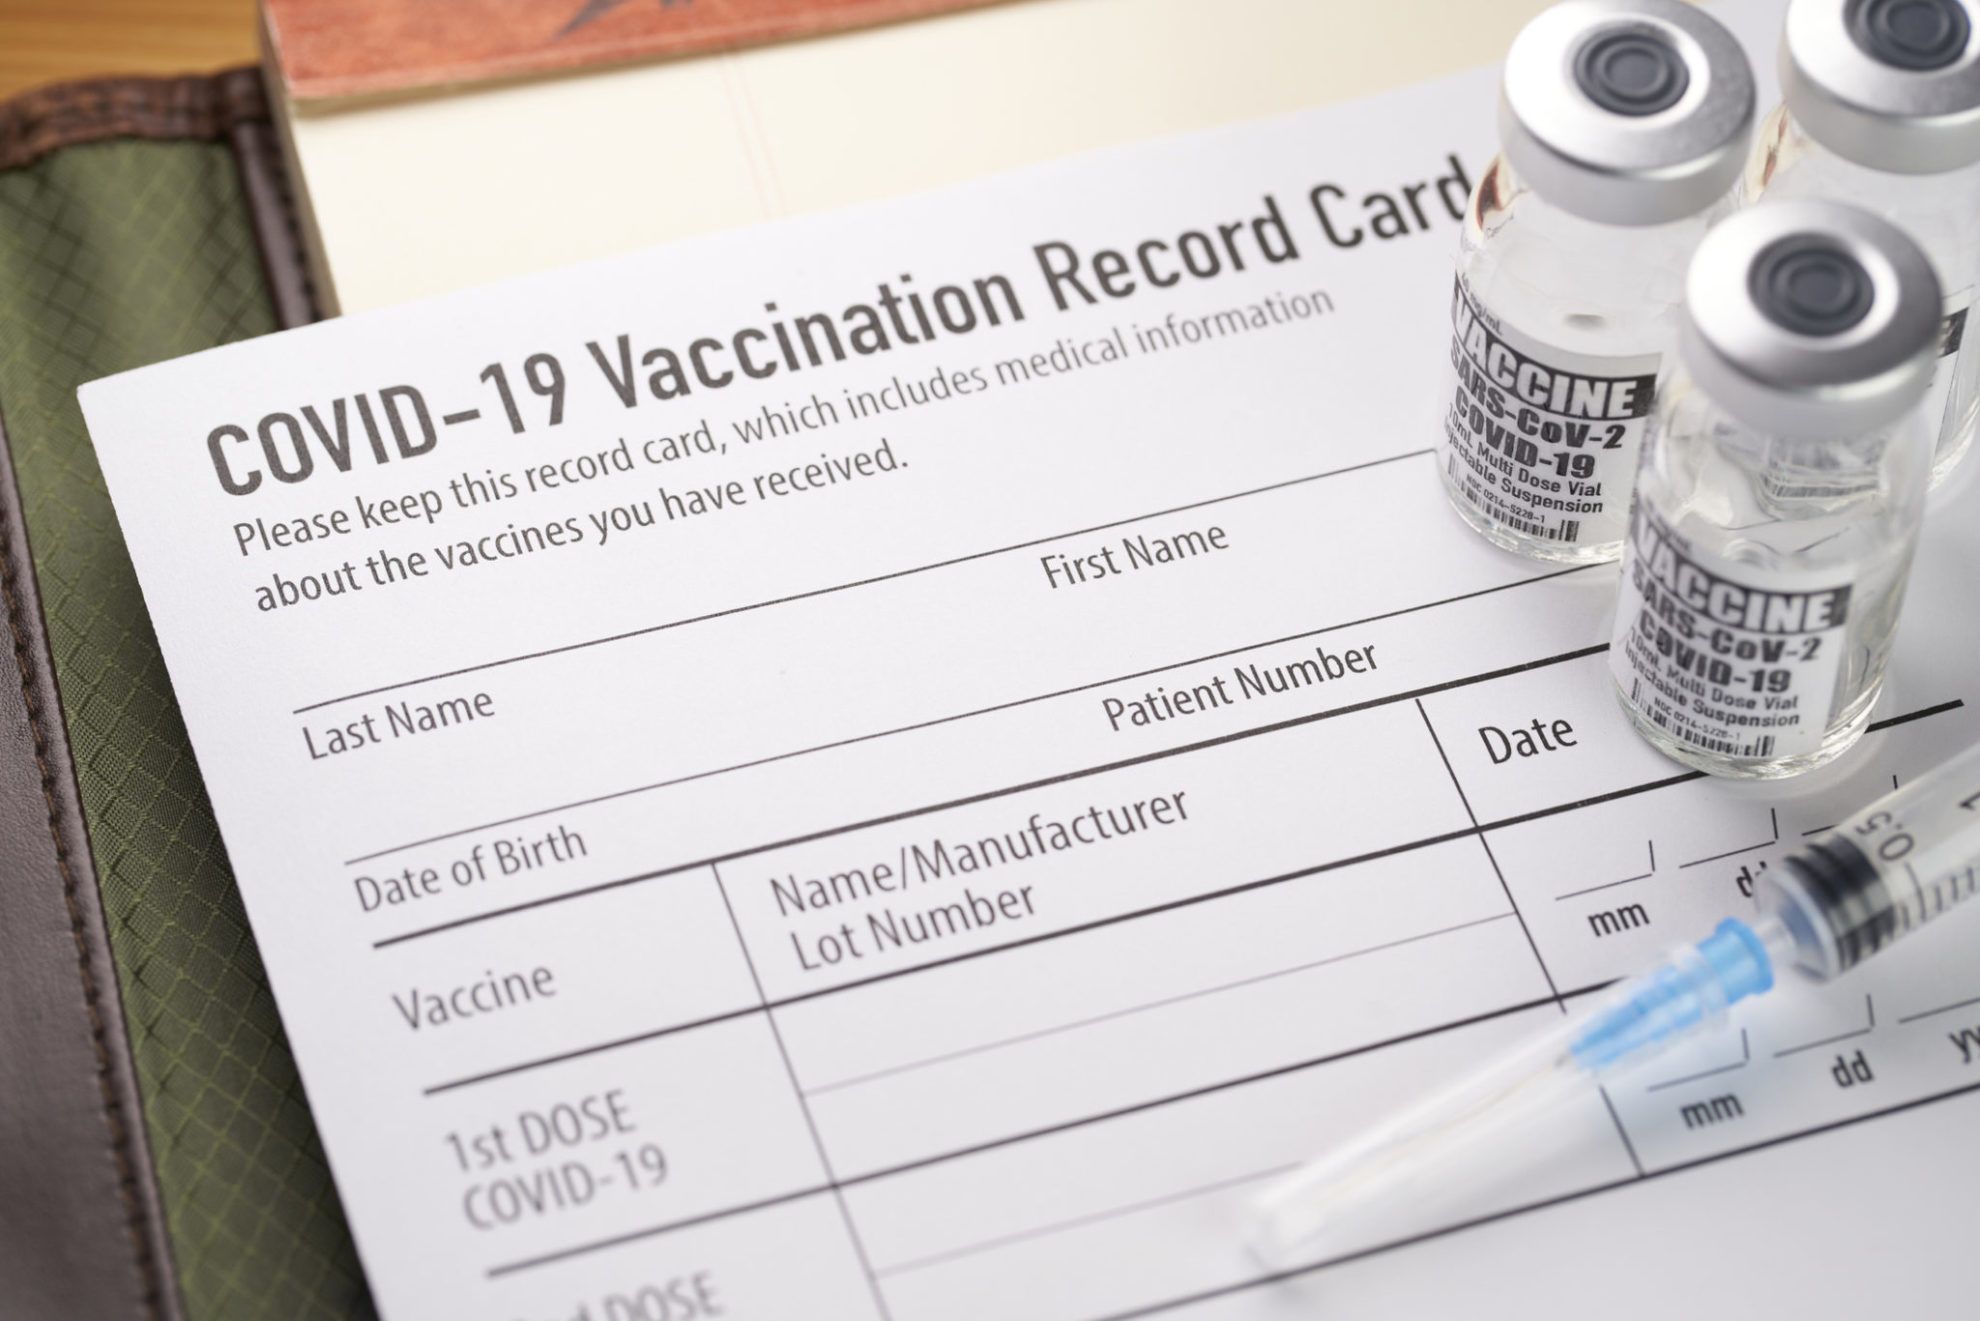 Covid-19 vaccination record card with vials and syringe. Covid-19 vaccination record card with vials and syringe.